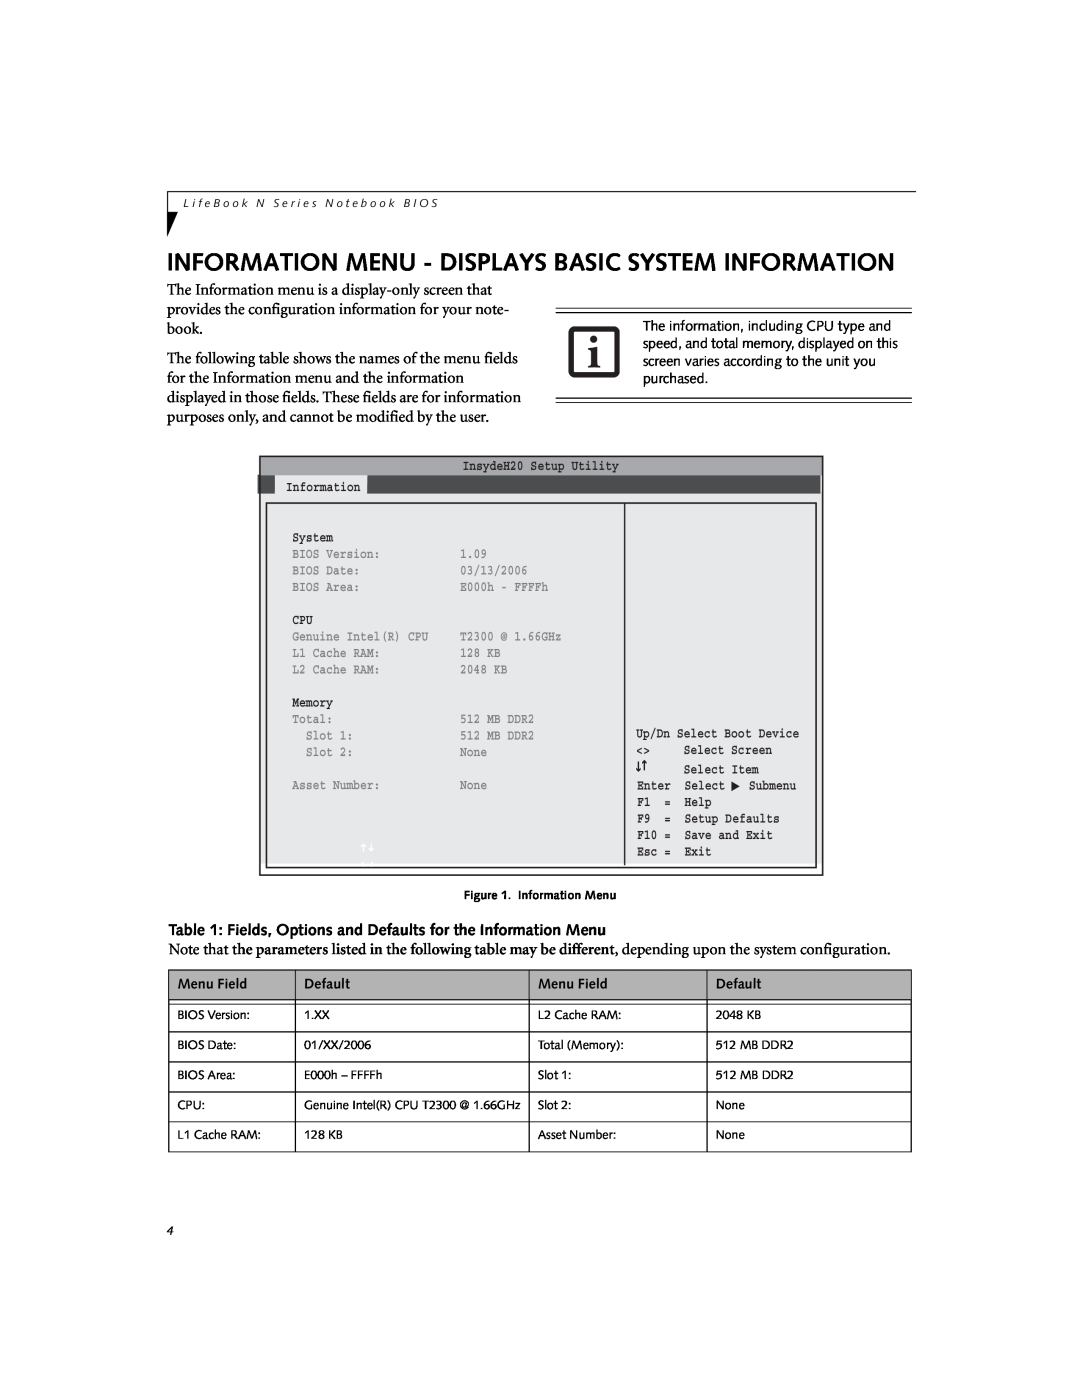 Fujitsu N3530 Information Menu - Displays Basic System Information, Fields, Options and Defaults for the Information Menu 